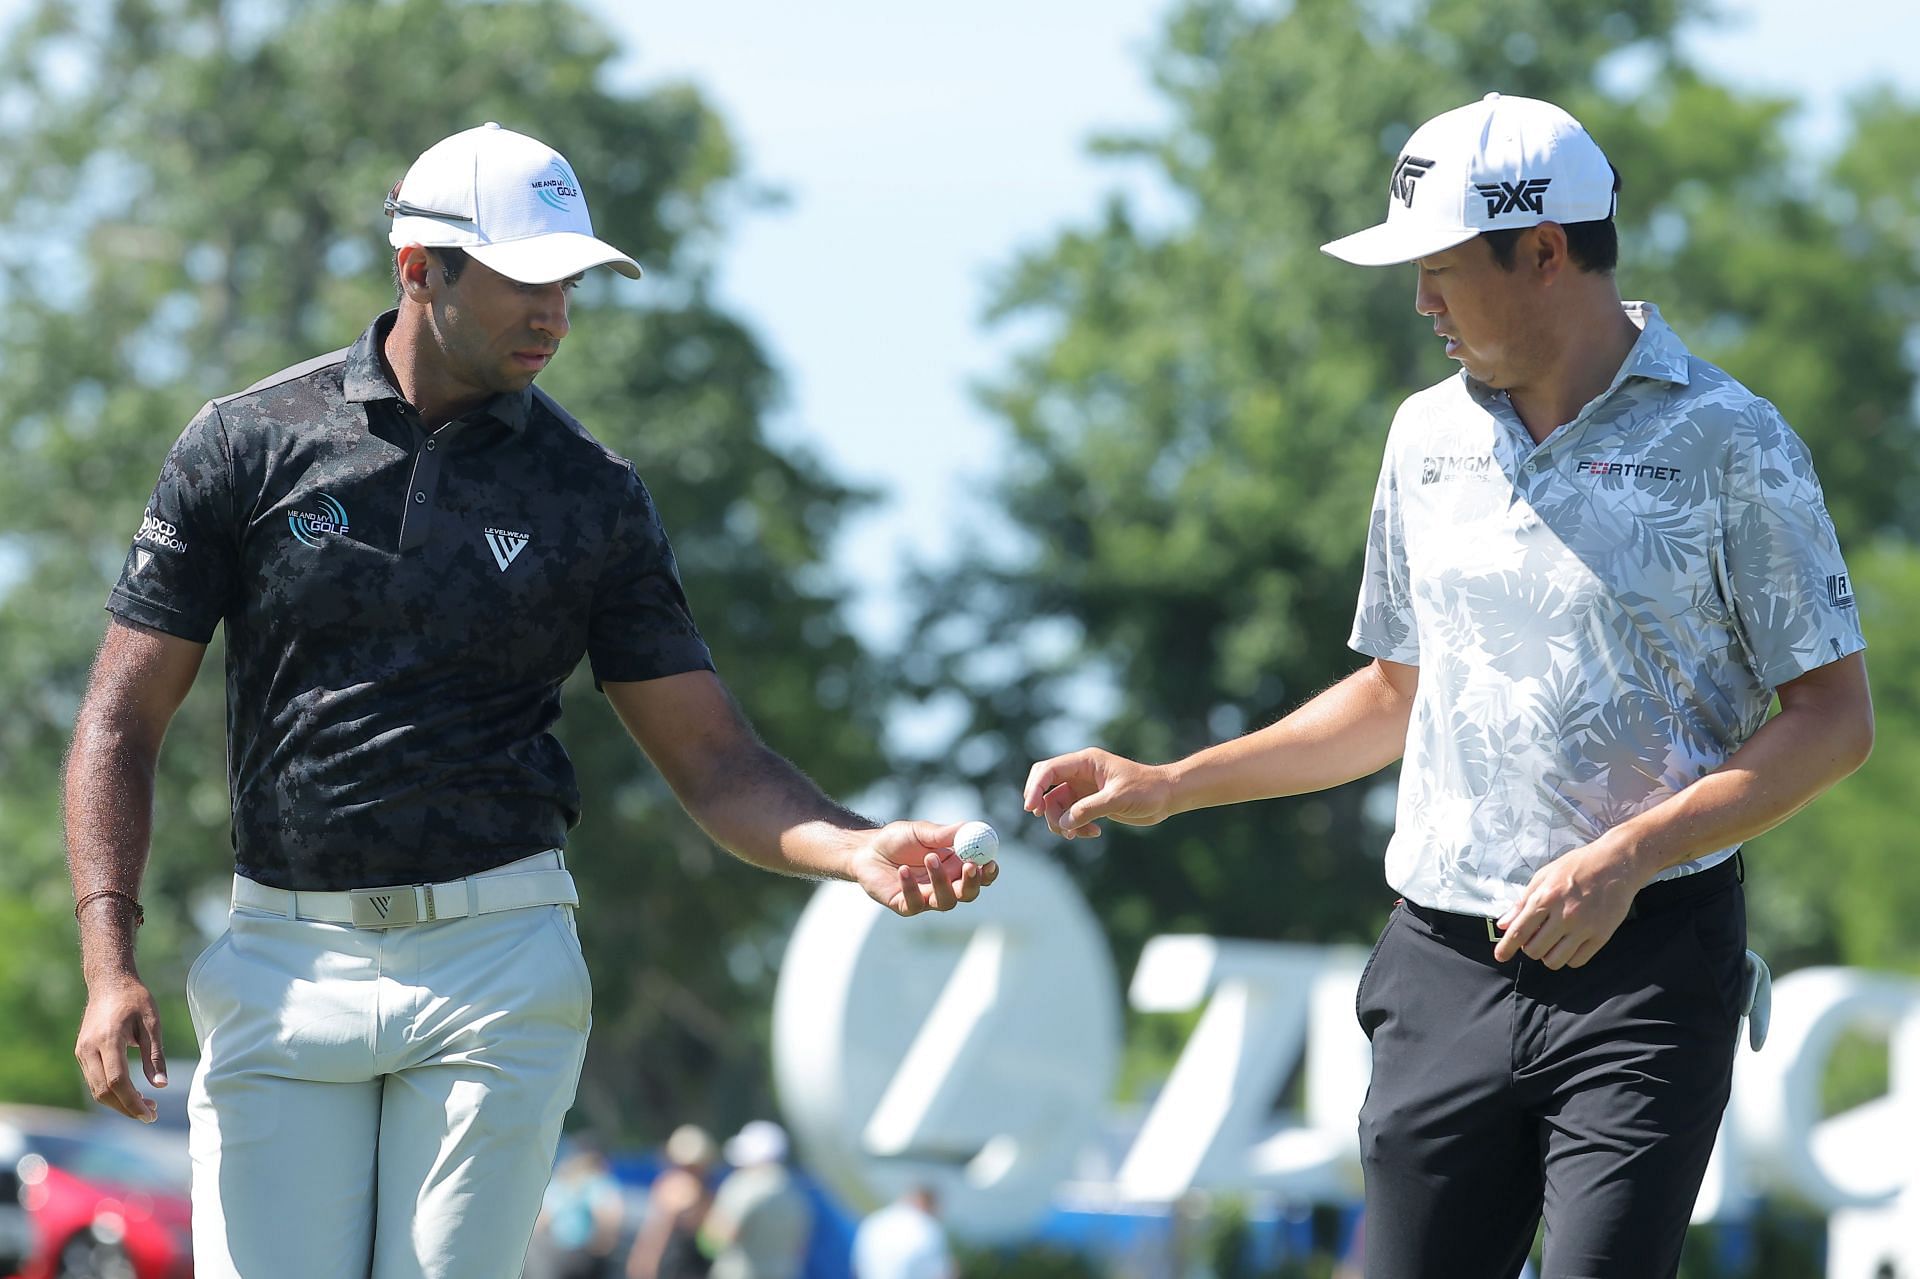 Aaron Rai hands David Lipsky a ball during the second round of the Zurich Classic of New Orleans